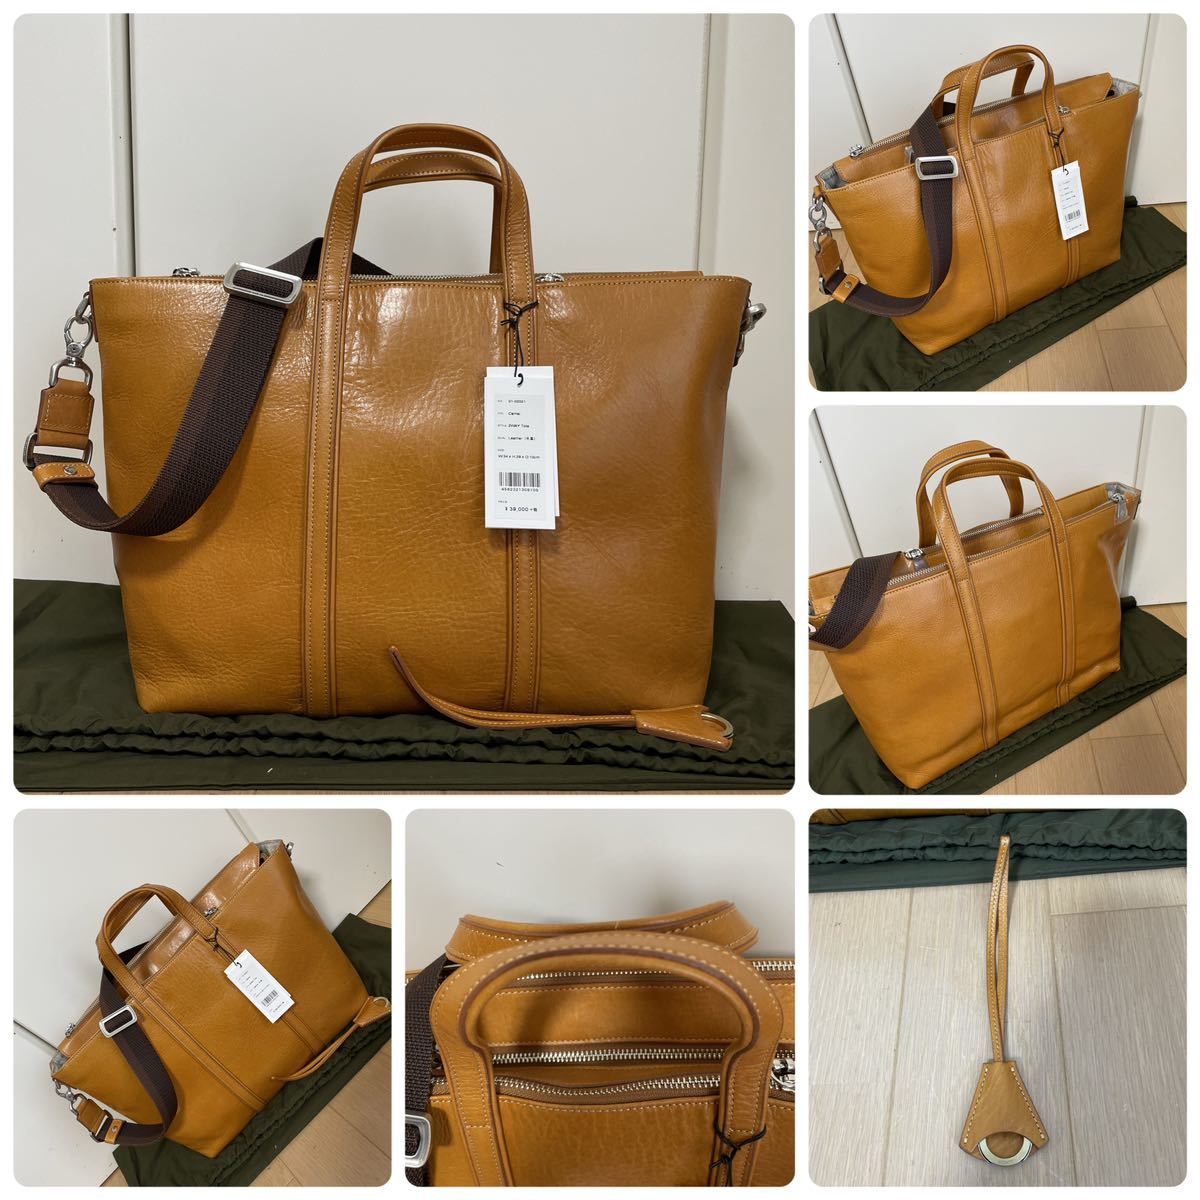 aniary アニアリトートバッグ Antique Leather 01-02021 新品未使用の画像9